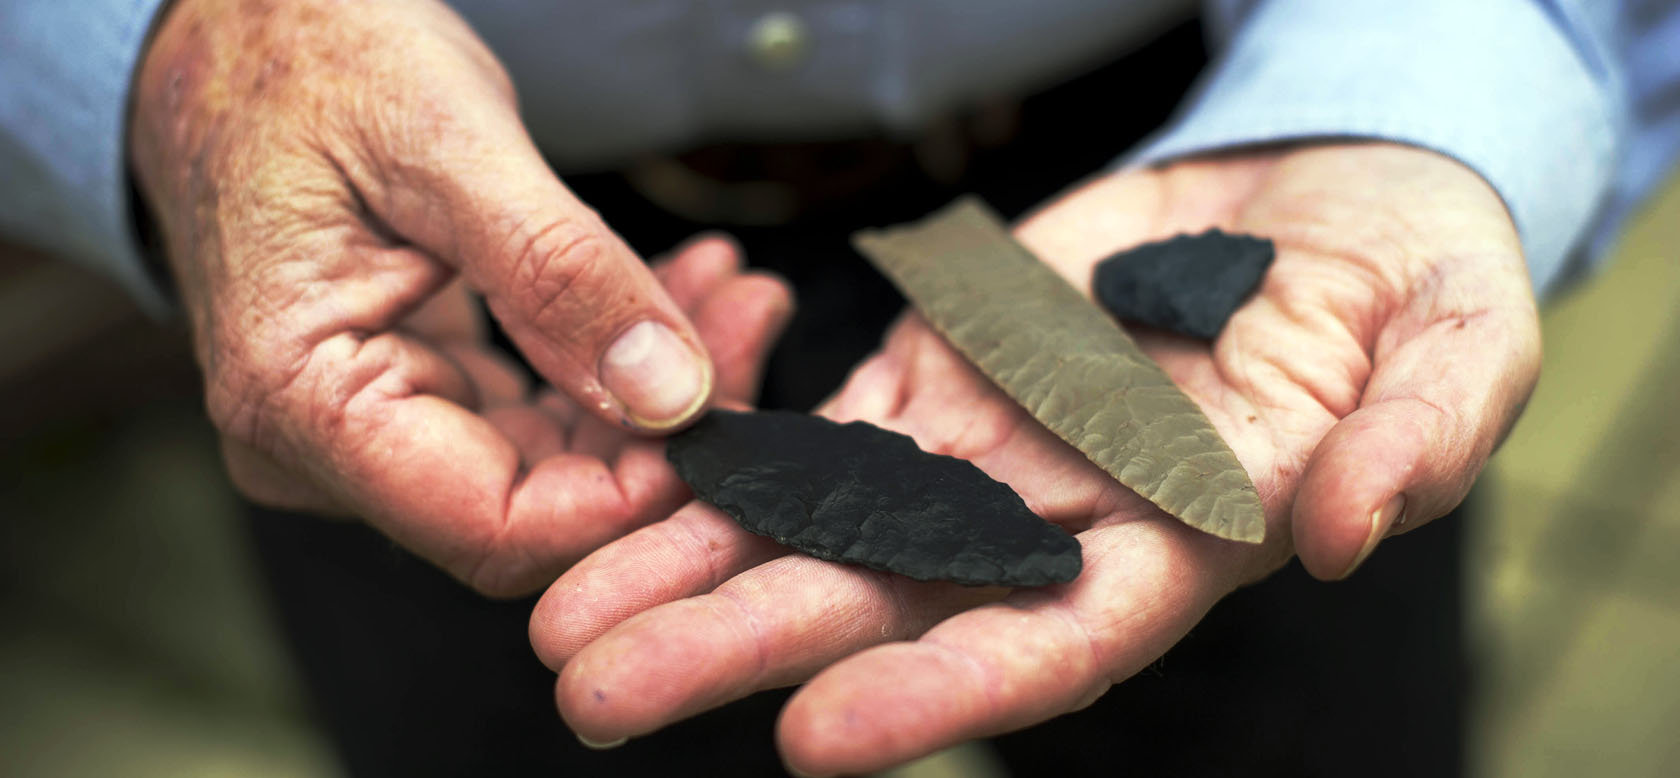 Clovis-made stone tools in the hands of Bruce Bradley, co-author of Across Atlantic Ice: The Origin of America’s Clovis Culture. (Photo by Jim Wileman)